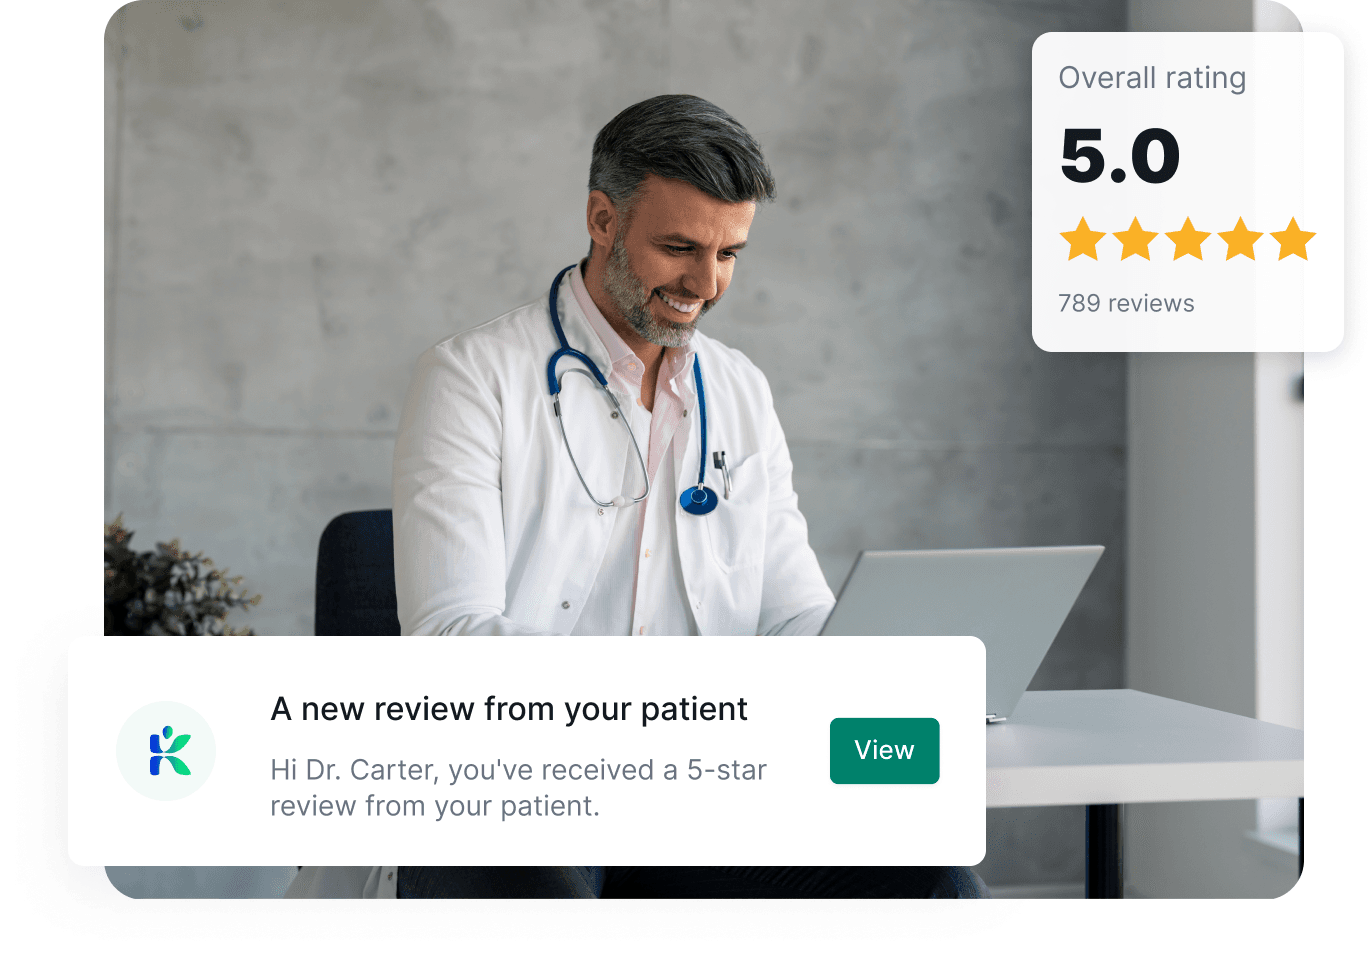 Elevate your online reputation — reputation management for medical practices